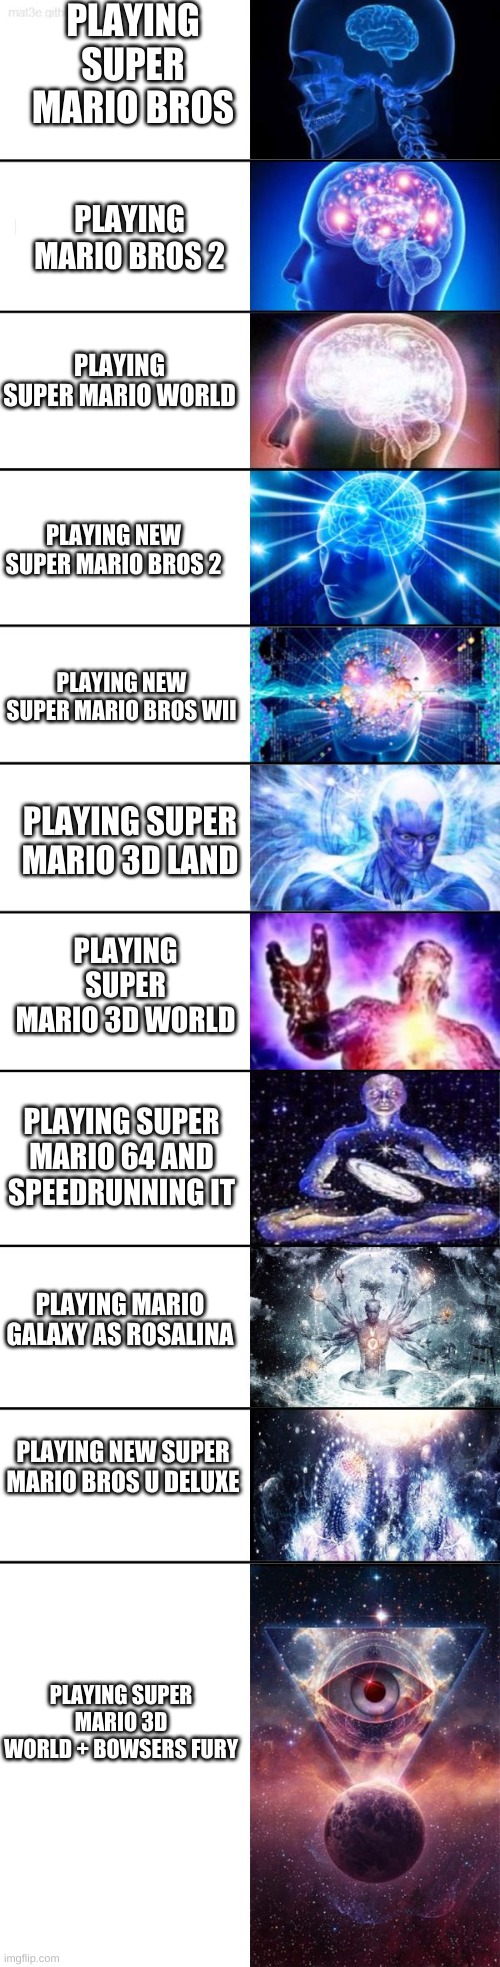 Extended Expanding Brain | PLAYING SUPER MARIO BROS; PLAYING MARIO BROS 2; PLAYING SUPER MARIO WORLD; PLAYING NEW SUPER MARIO BROS 2; PLAYING NEW SUPER MARIO BROS WII; PLAYING SUPER MARIO 3D LAND; PLAYING SUPER MARIO 3D WORLD; PLAYING SUPER MARIO 64 AND SPEEDRUNNING IT; PLAYING MARIO GALAXY AS ROSALINA; PLAYING NEW SUPER MARIO BROS U DELUXE; PLAYING SUPER MARIO 3D WORLD + BOWSERS FURY | image tagged in extended expanding brain | made w/ Imgflip meme maker